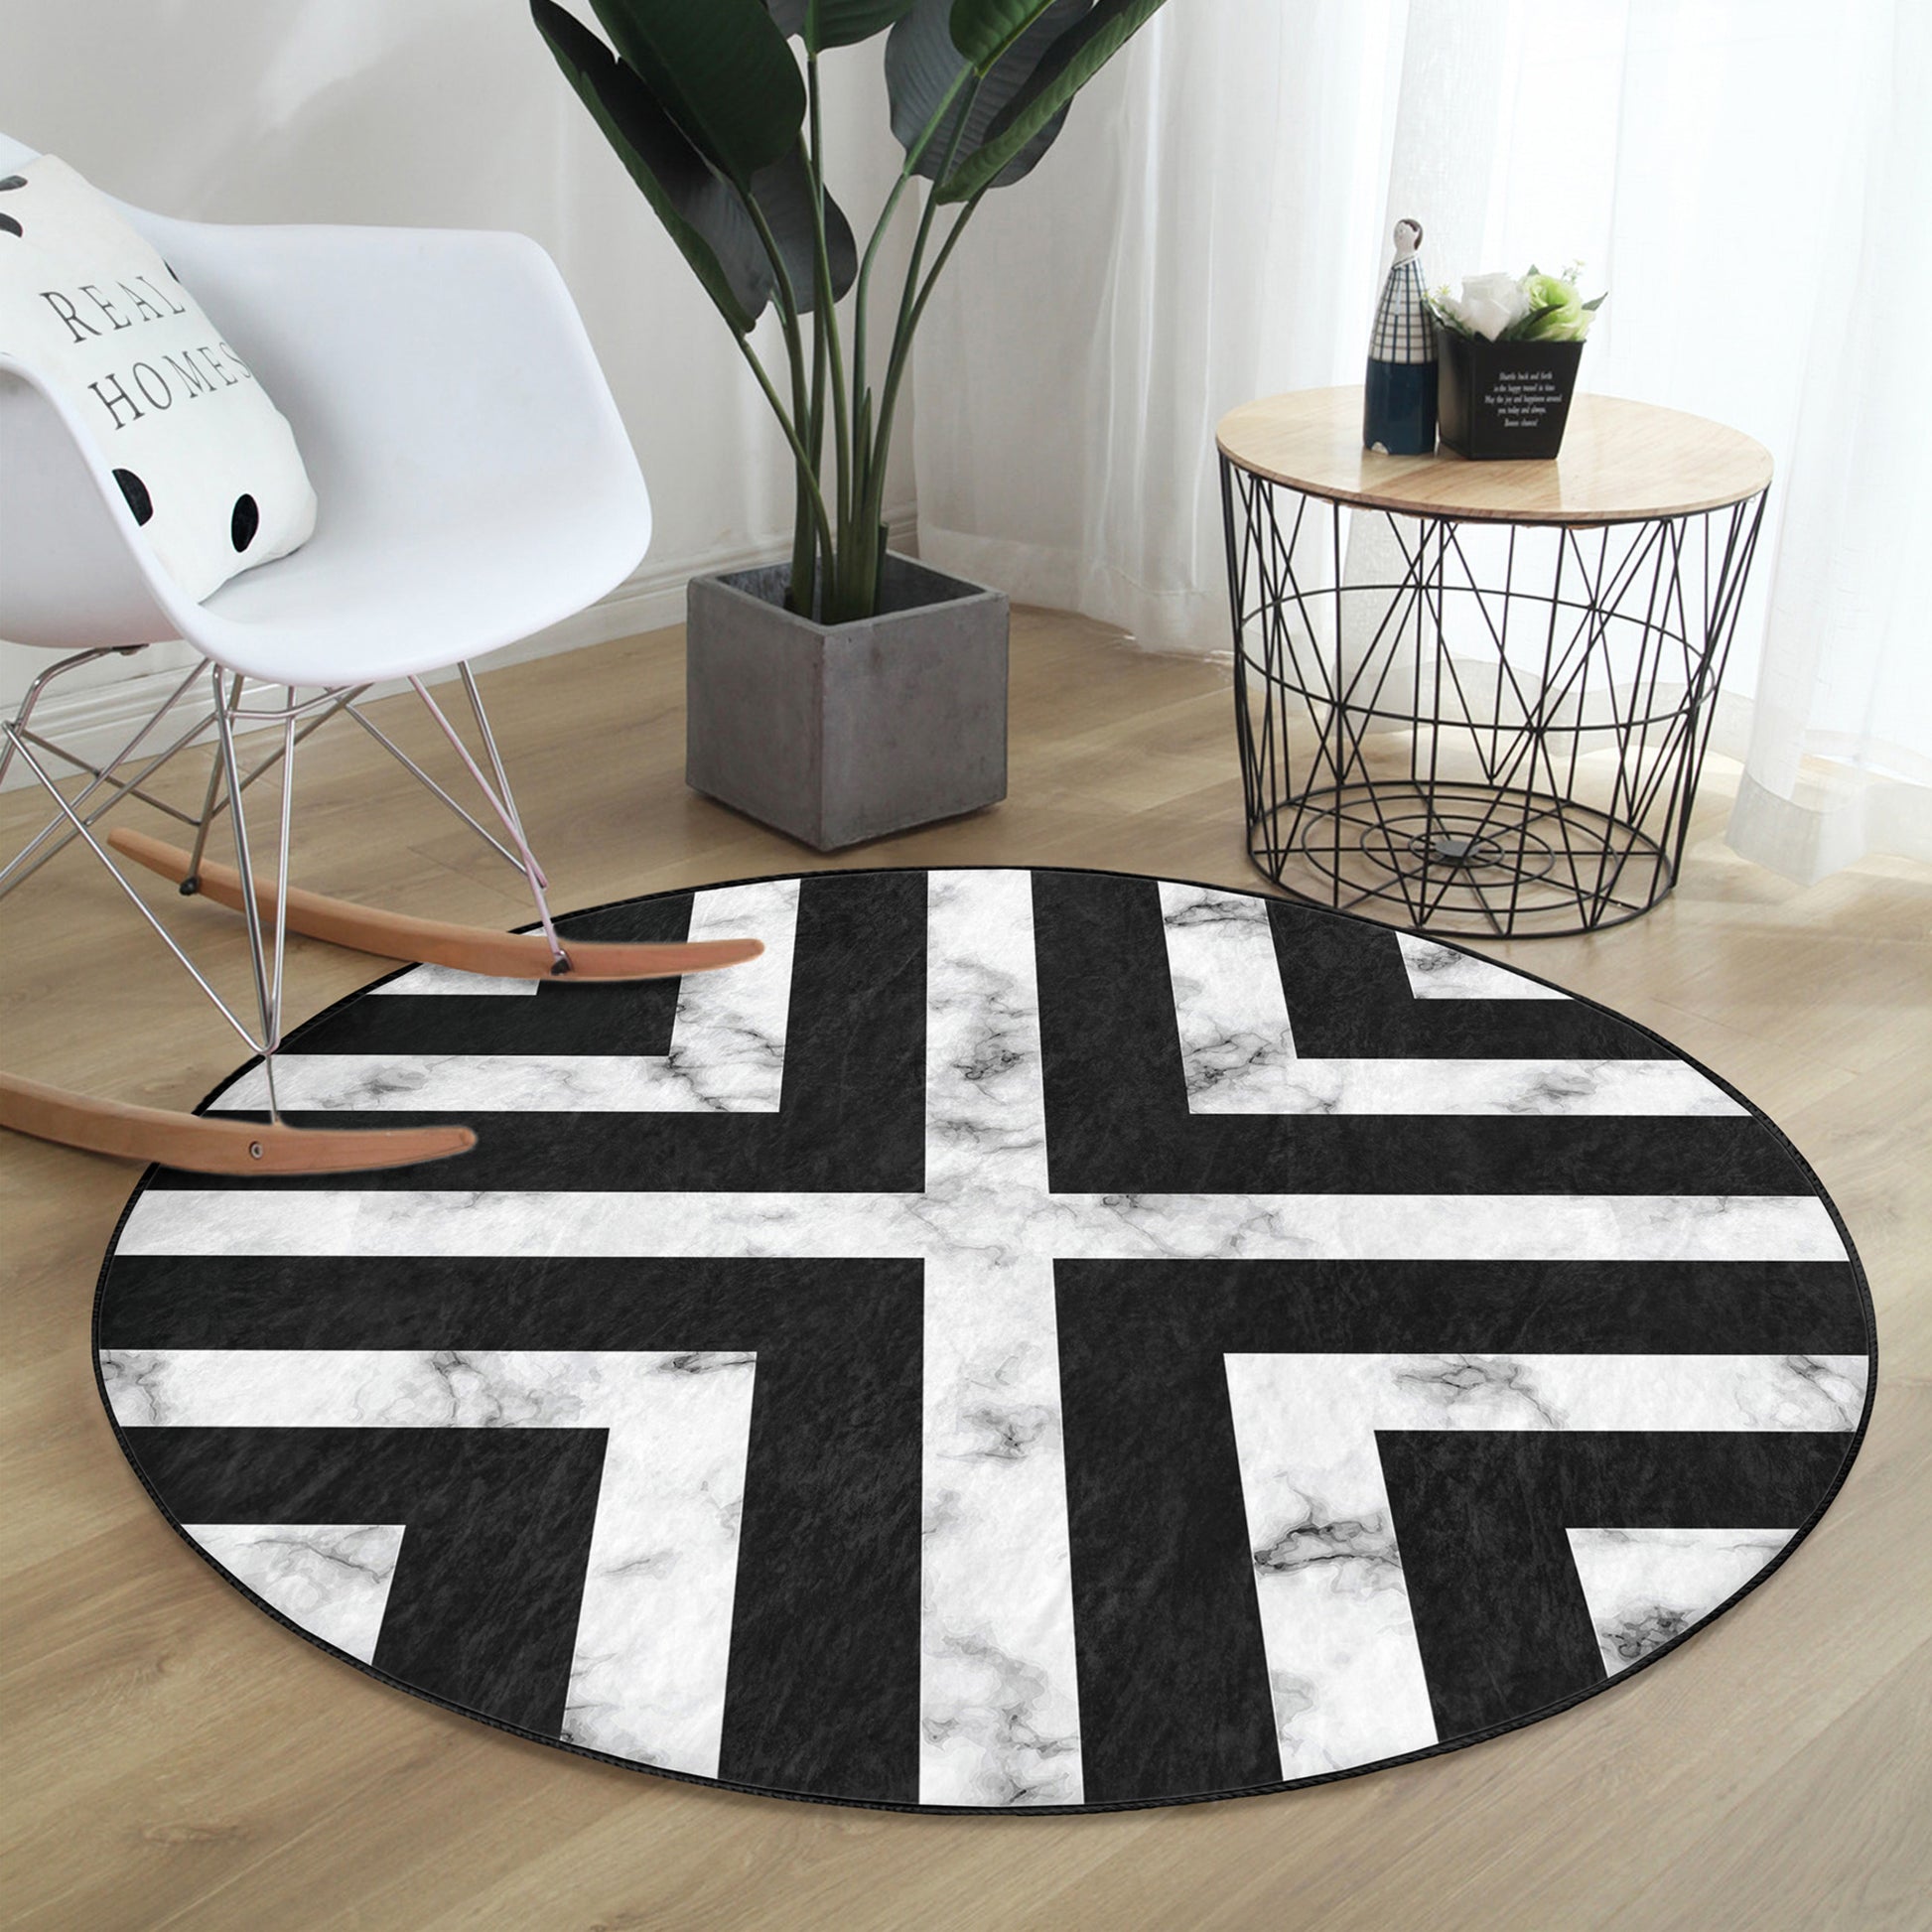 Round Patterned Floor Rug - Versatile Home Accent